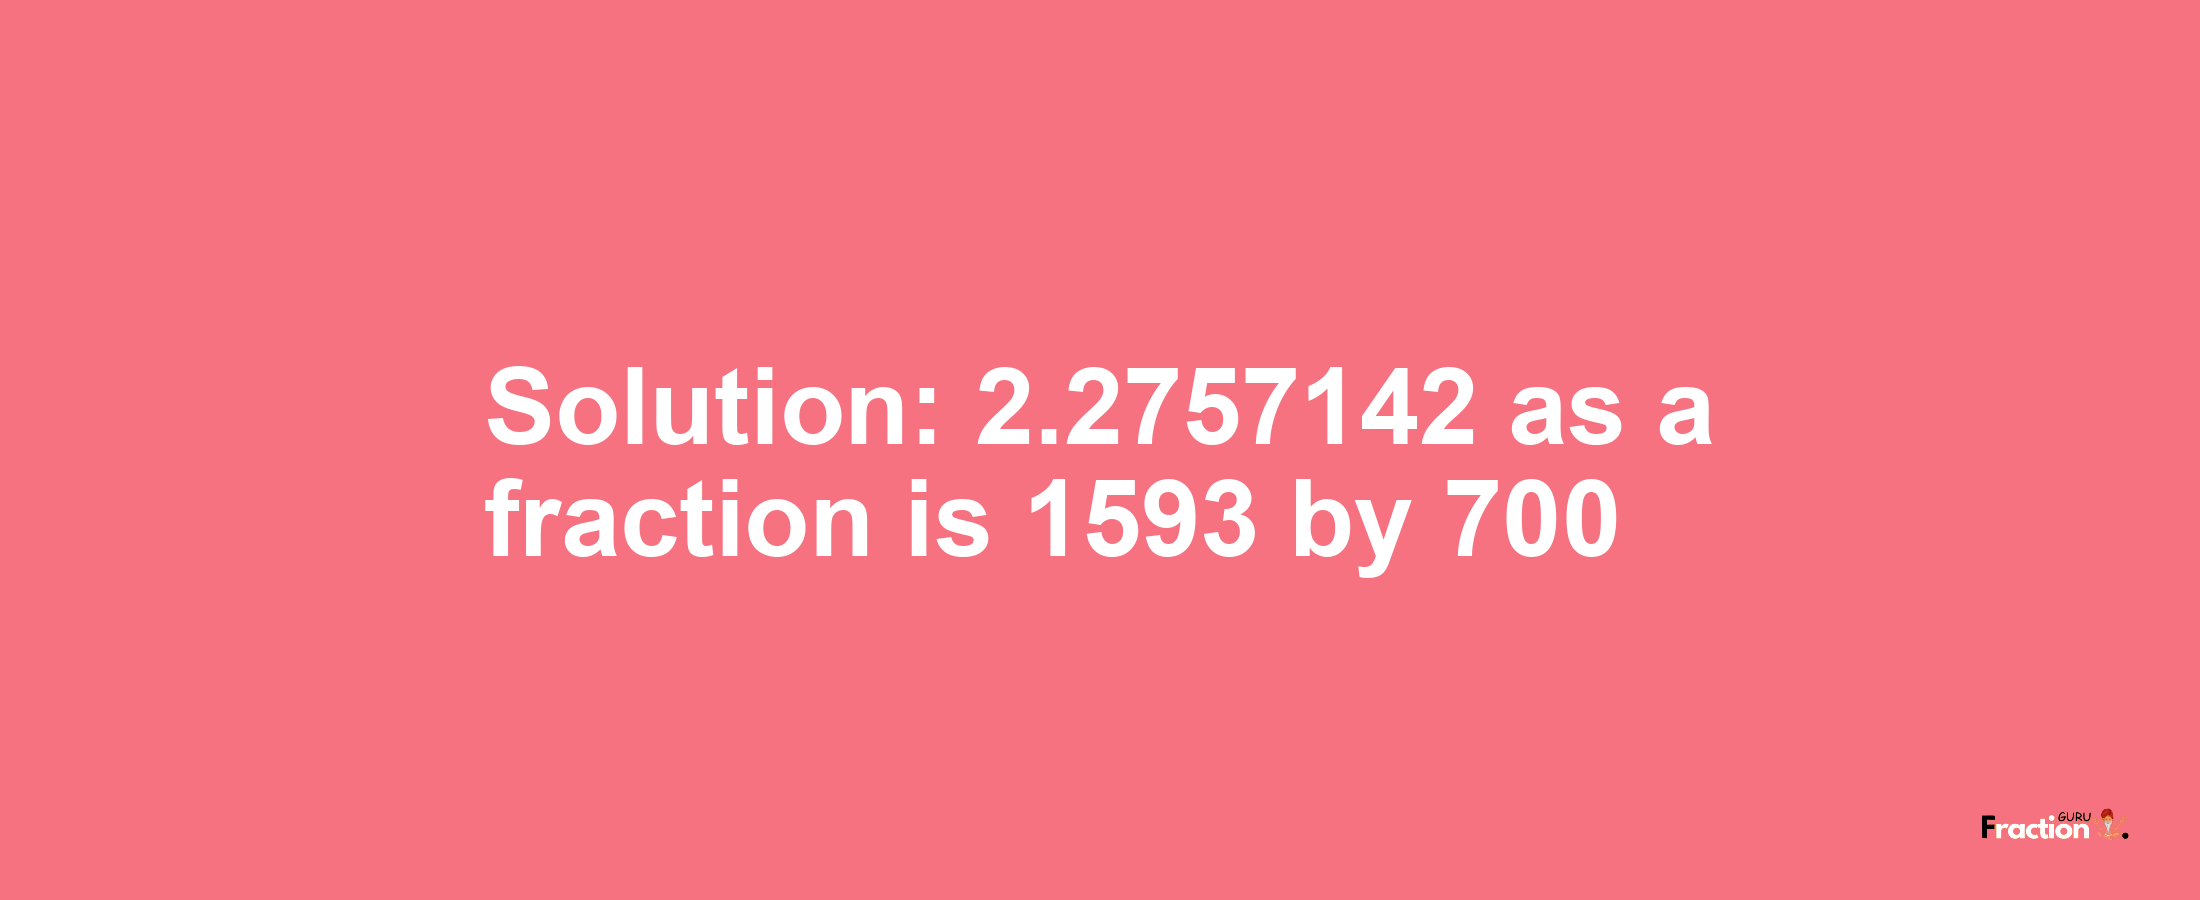 Solution:2.2757142 as a fraction is 1593/700